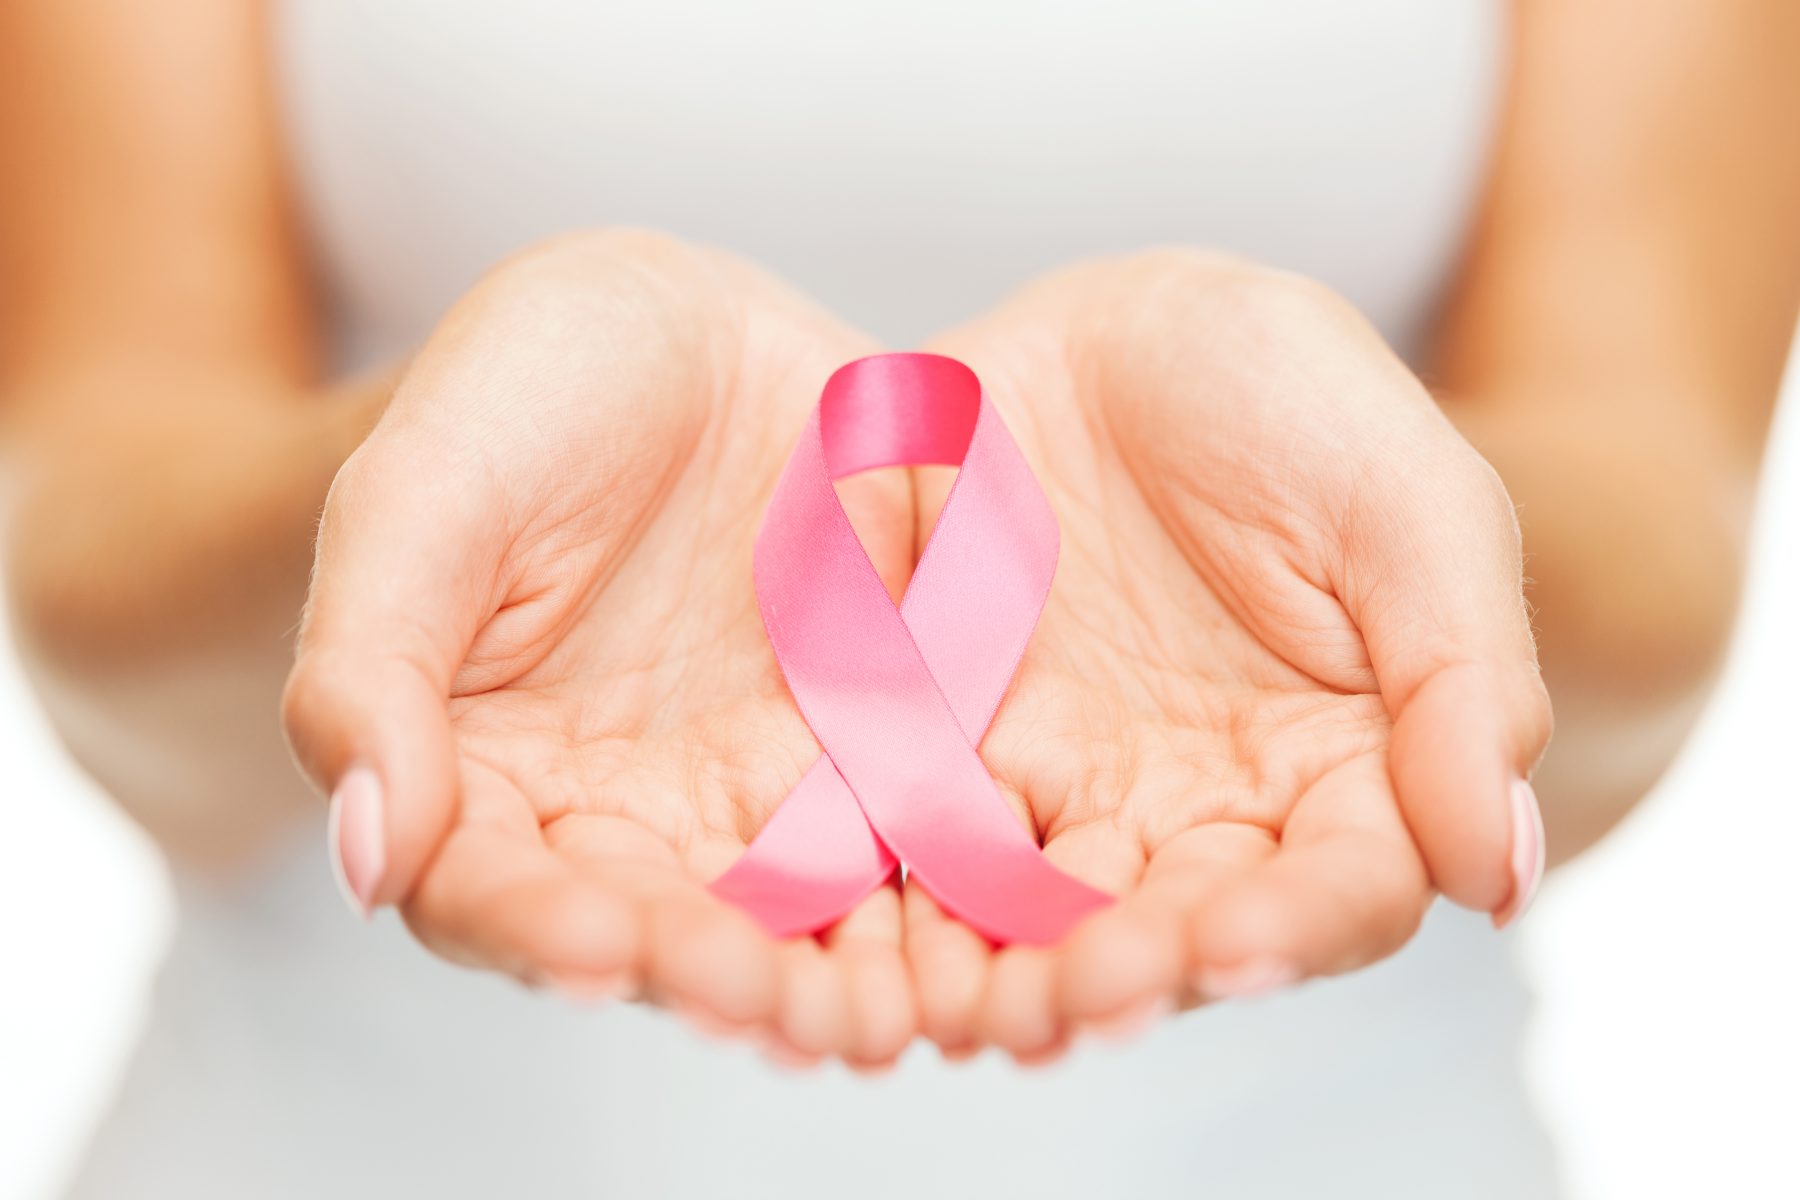 Did You Know You Can Help Prevent Breast Cancer?